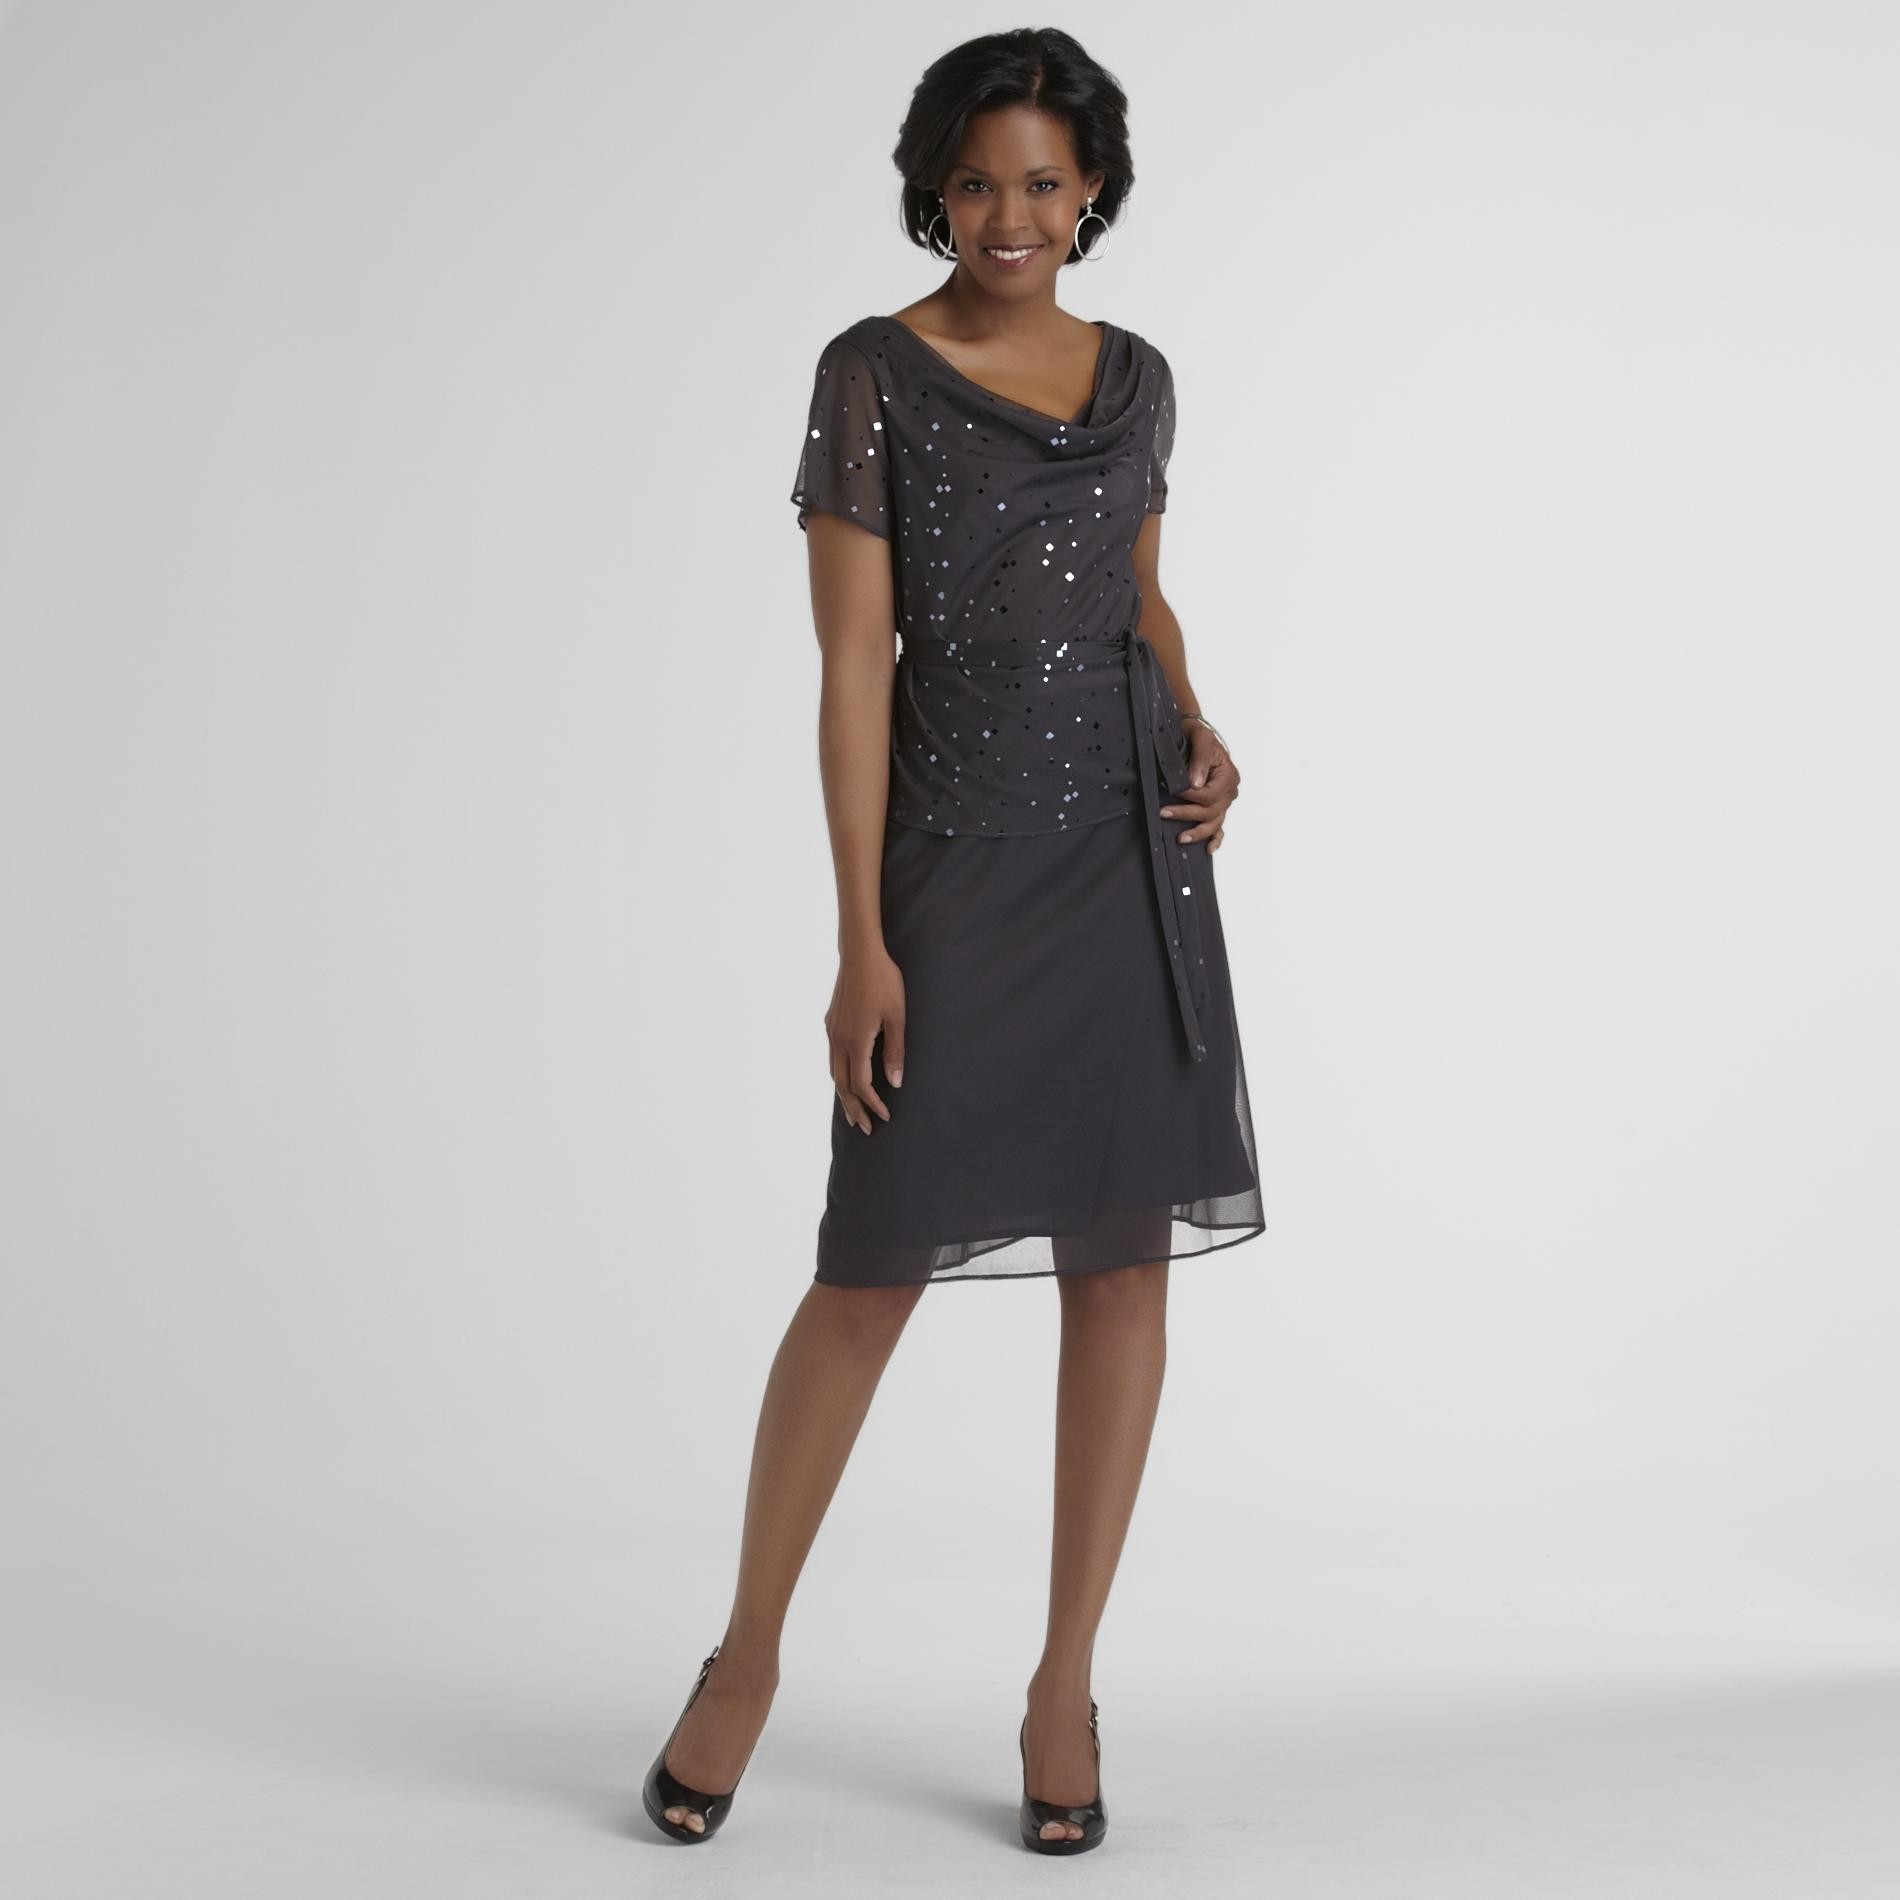 Women's Party Dress - Spangled Charcoal 18